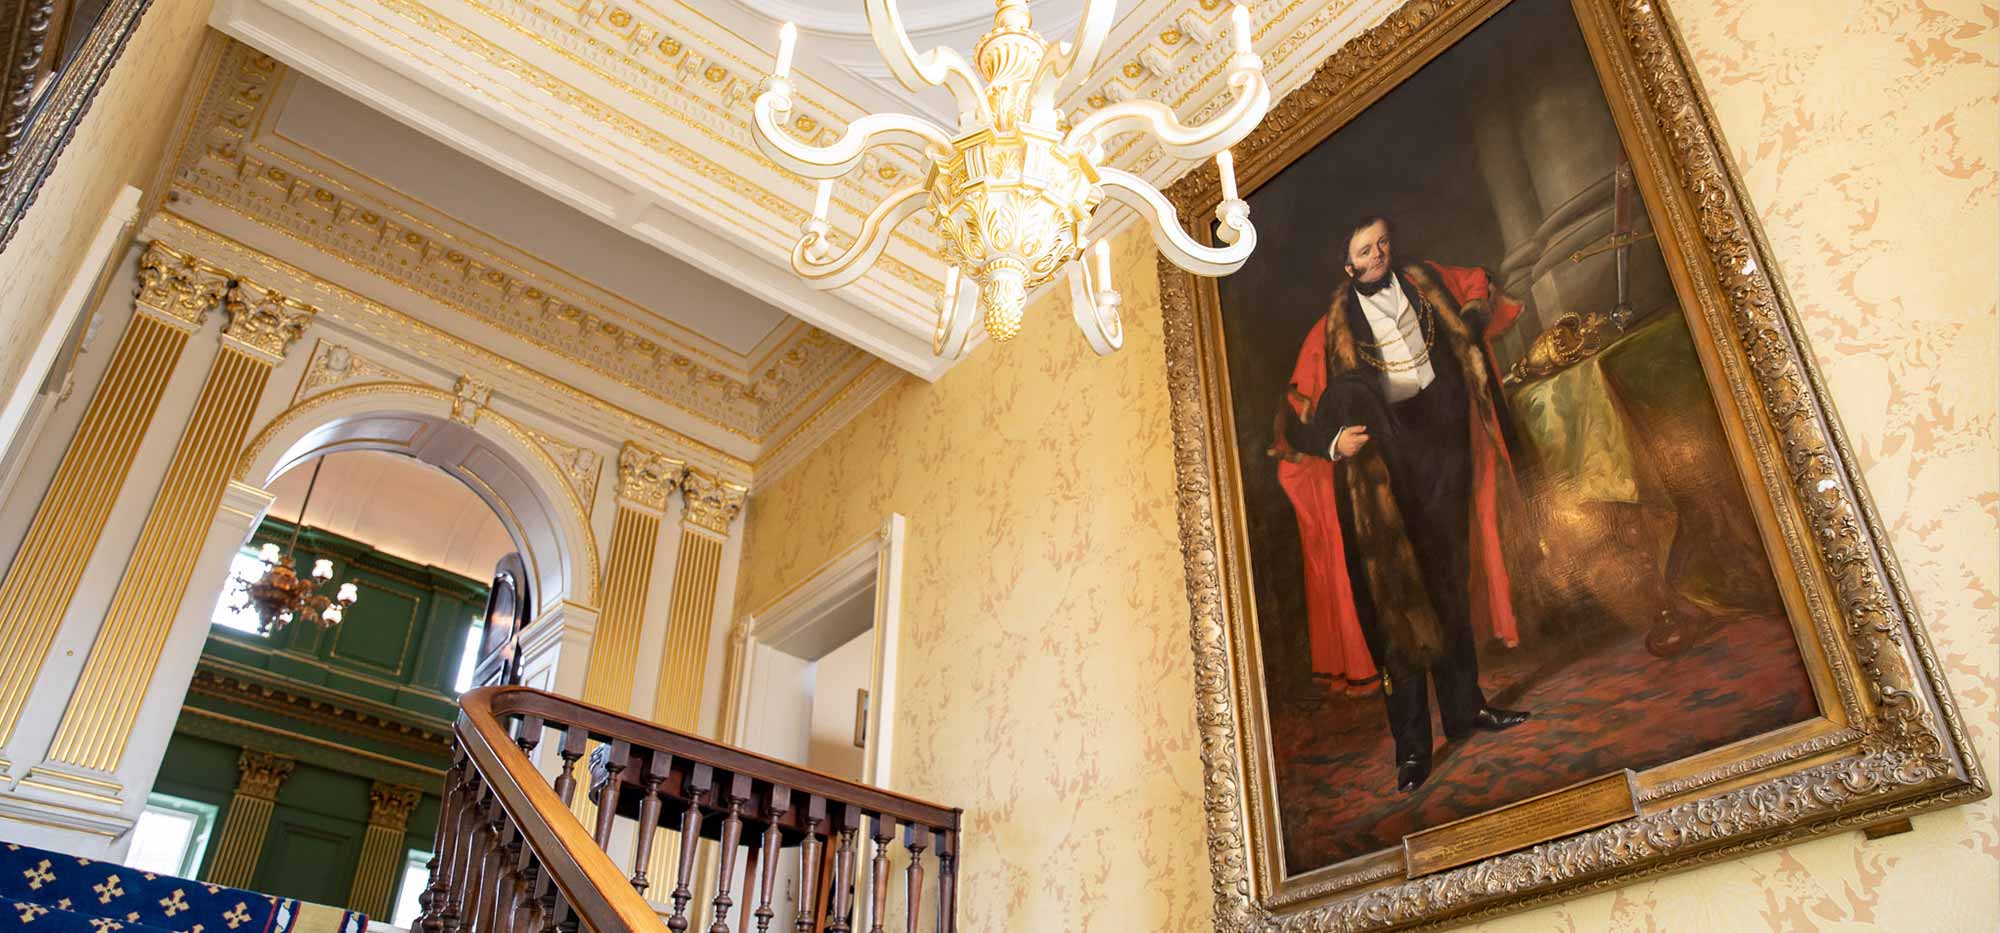 A view of the Railway King portrait which hangs in a stairwell in the Mansion House.